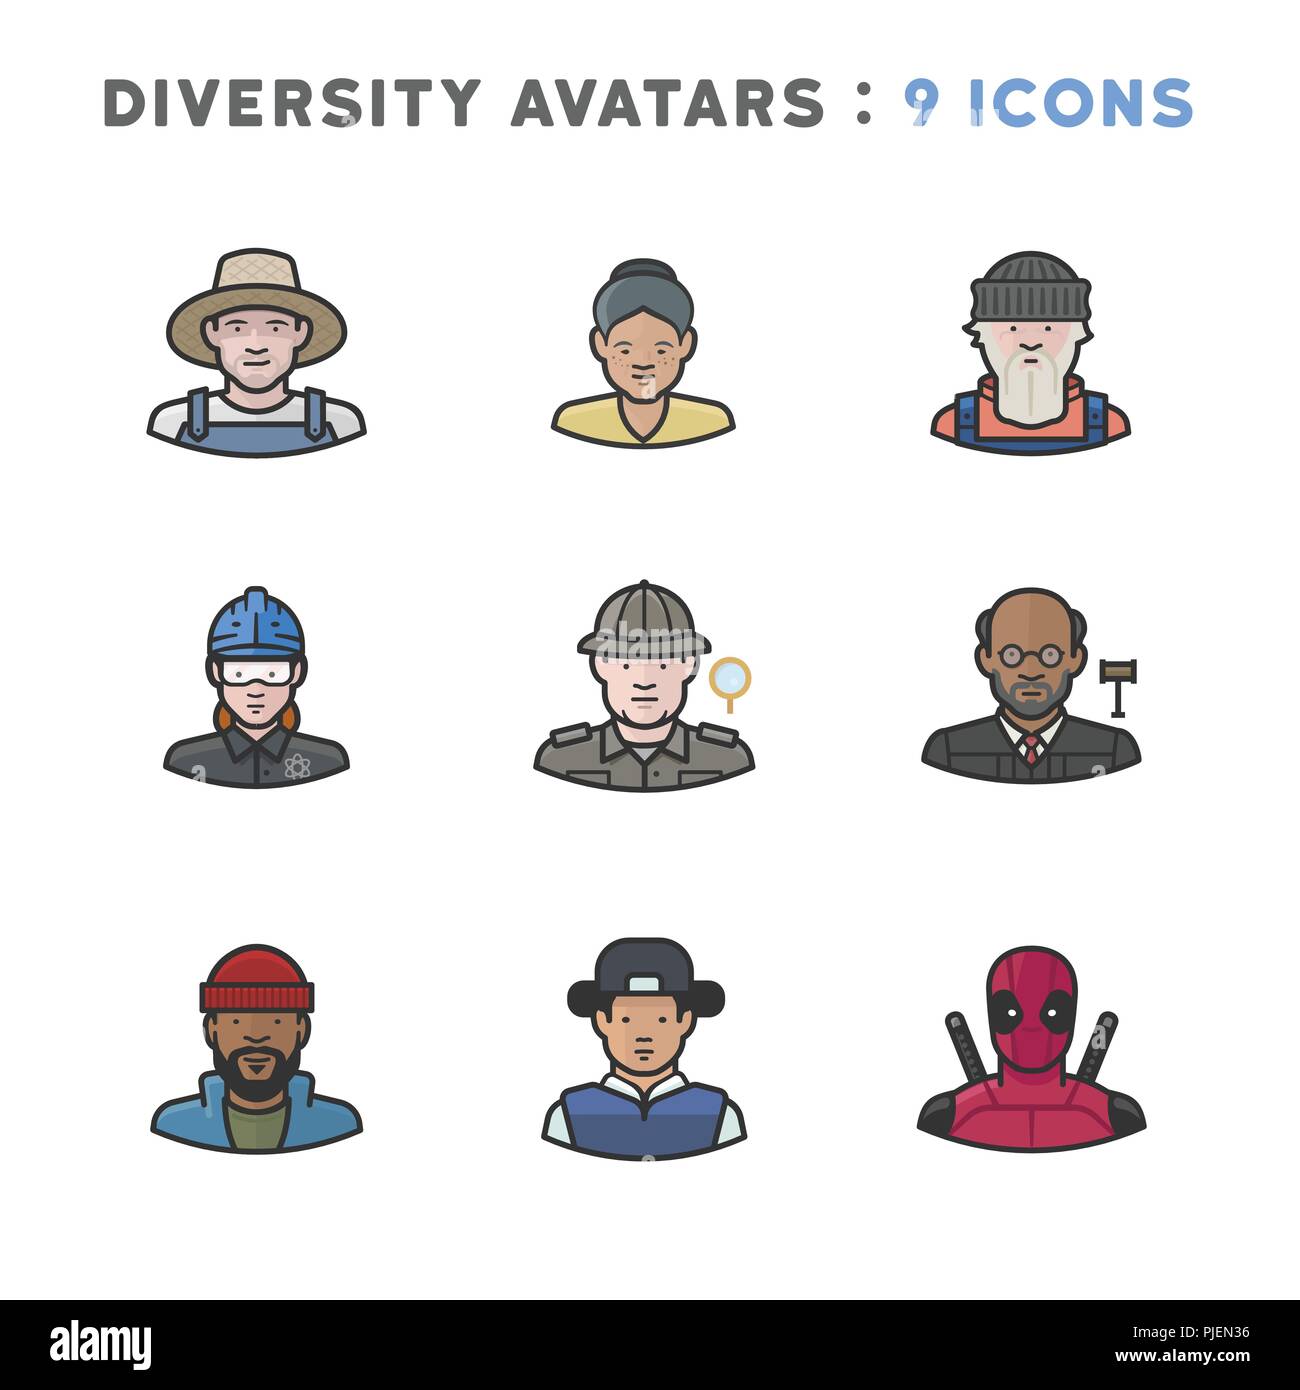 9 Avatars of people including elderly people, a judge, a fisherman, a construction worker, and archaeologist. Stock Vector